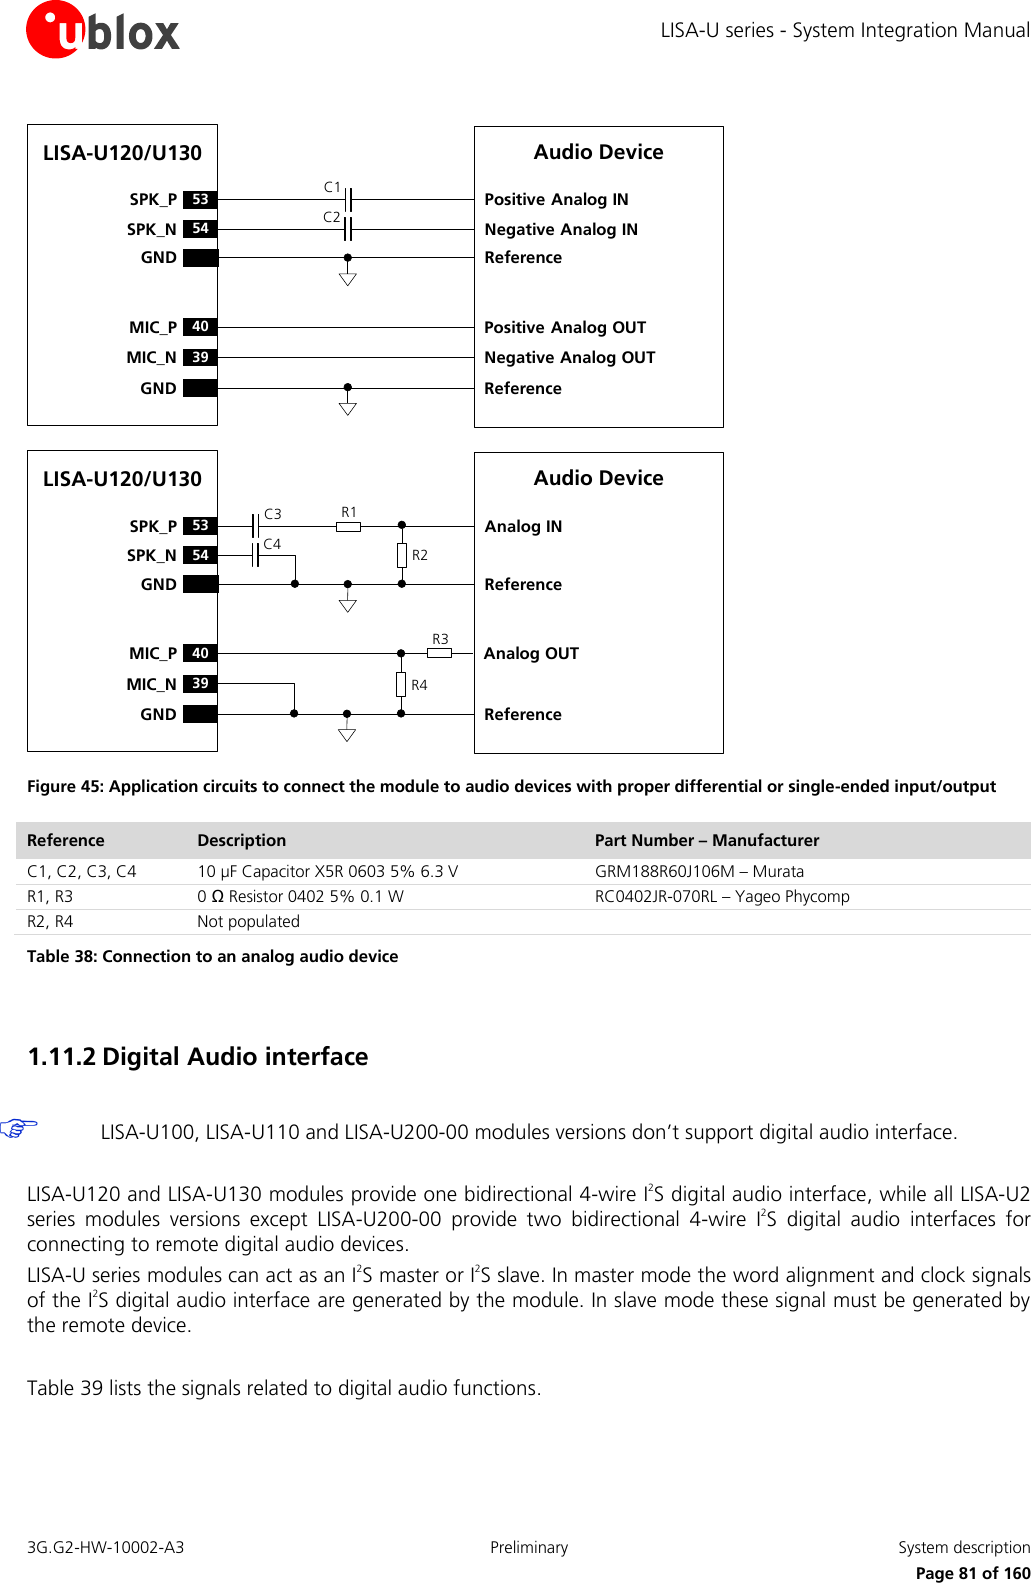 LISA-U series - System Integration Manual 3G.G2-HW-10002-A3  Preliminary  System description      Page 81 of 160 LISA-U120/U130C1C254SPK_N53SPK_PGND40MIC_PGNDNegative Analog INPositive Analog INNegative Analog OUTPositive Analog OUTAudio DeviceReferenceReference39MIC_NLISA-U120/U13054SPK_N53SPK_PGND40MIC_PGNDAnalog INAudio DeviceReferenceReference39MIC_NAnalog OUTC3C4 R2R1R4R3 Figure 45: Application circuits to connect the module to audio devices with proper differential or single-ended input/output Reference Description Part Number – Manufacturer C1, C2, C3, C4 10 µF Capacitor X5R 0603 5% 6.3 V  GRM188R60J106M – Murata R1, R3 0 Ω Resistor 0402 5% 0.1 W  RC0402JR-070RL – Yageo Phycomp R2, R4 Not populated  Table 38: Connection to an analog audio device  1.11.2 Digital Audio interface    LISA-U100, LISA-U110 and LISA-U200-00 modules versions don’t support digital audio interface.  LISA-U120 and LISA-U130 modules provide one bidirectional 4-wire I2S digital audio interface, while all LISA-U2 series  modules  versions  except  LISA-U200-00  provide  two  bidirectional  4-wire  I2S  digital  audio  interfaces  for connecting to remote digital audio devices. LISA-U series modules can act as an I2S master or I2S slave. In master mode the word alignment and clock signals of the I2S digital audio interface are generated by the module. In slave mode these signal must be generated by the remote device.  Table 39 lists the signals related to digital audio functions.  